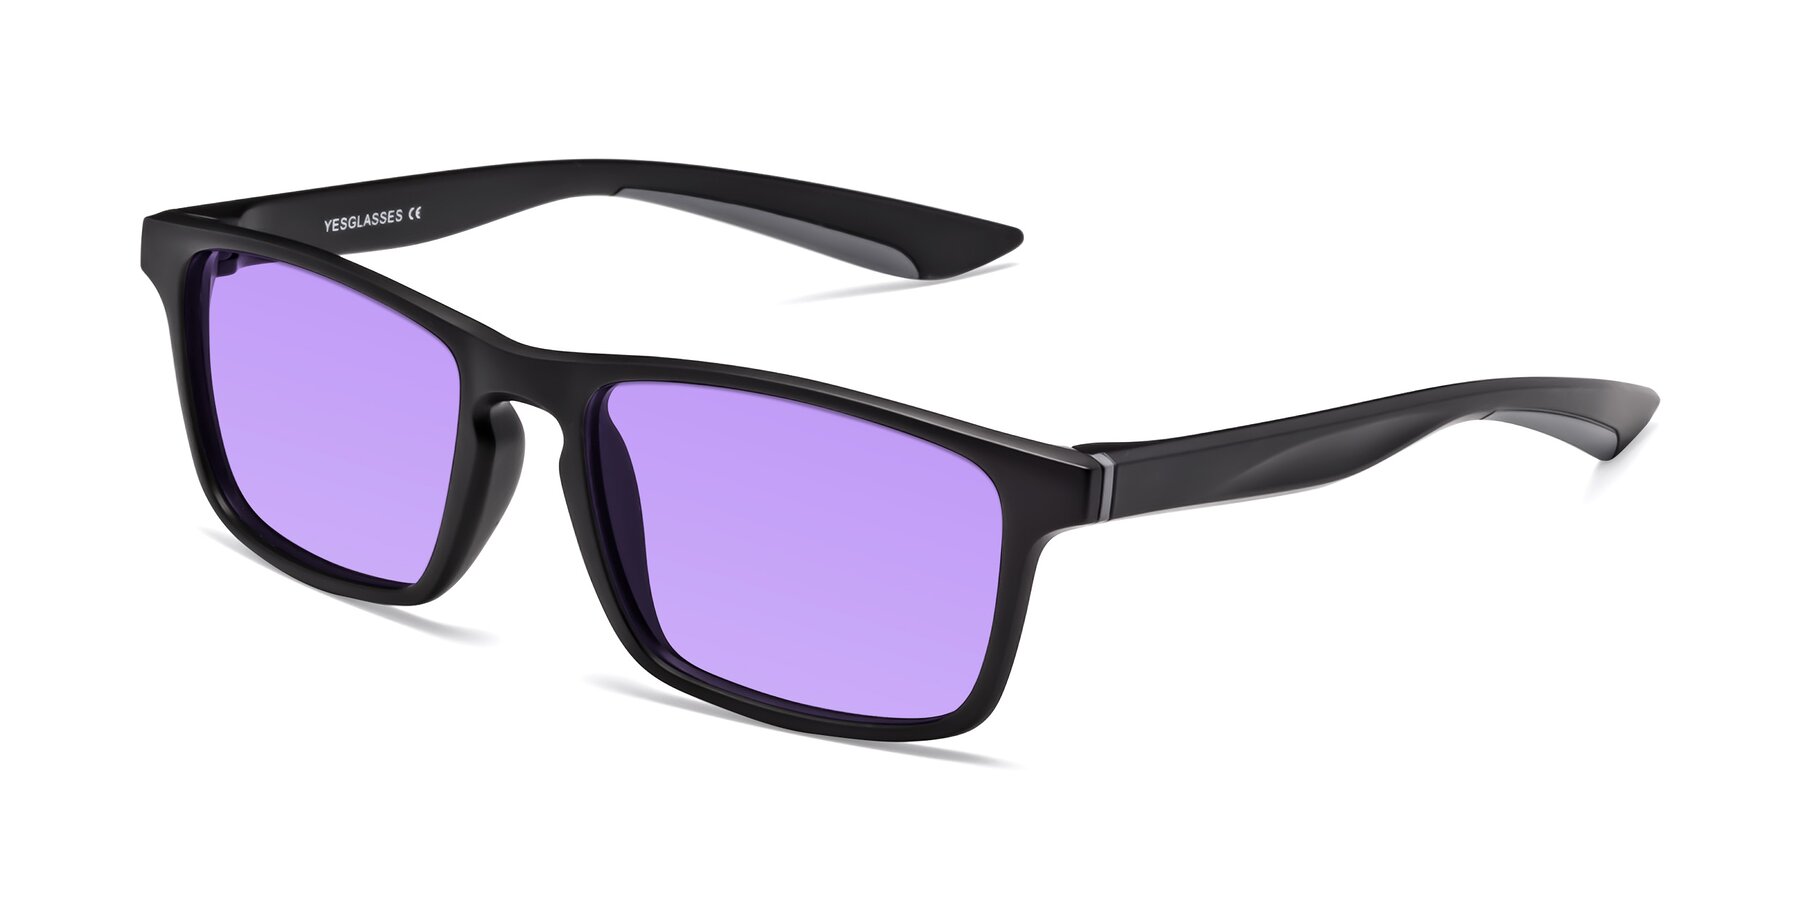 Angle of Passion in Matte Black-Gray with Medium Purple Tinted Lenses